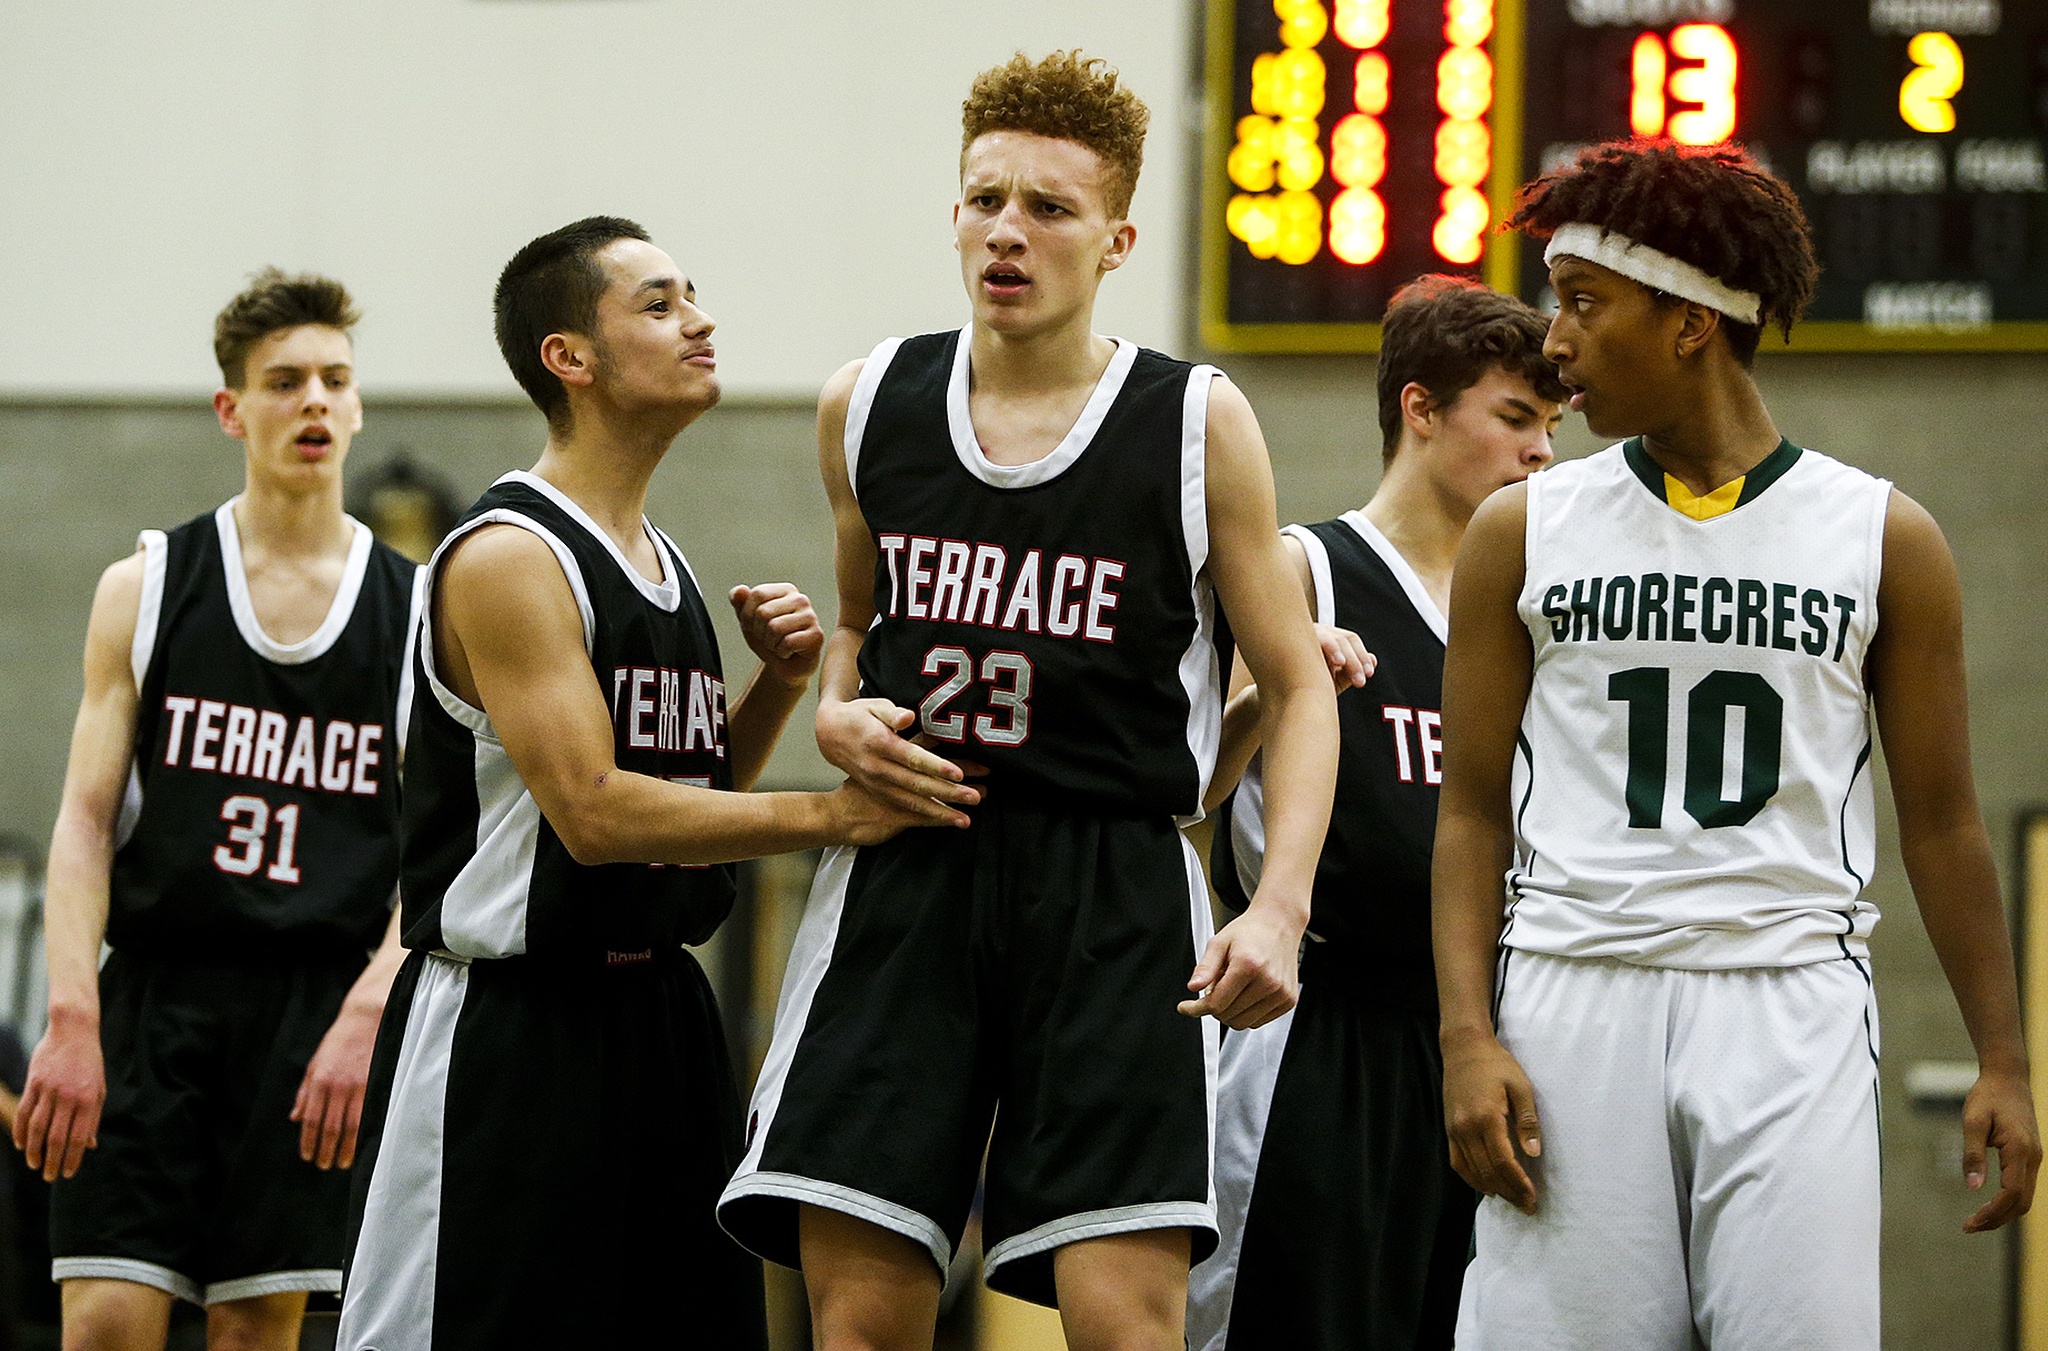 Mountlake Terrace’s Khyree Armstead (center) celebrates a basket with teammate Joey Gardner (center left) as Shorecrest’s Dagmawe Menelik looks on during a game on Tuesday at Shorecrest High School in Shoreline. (Ian Terry / The Herald)